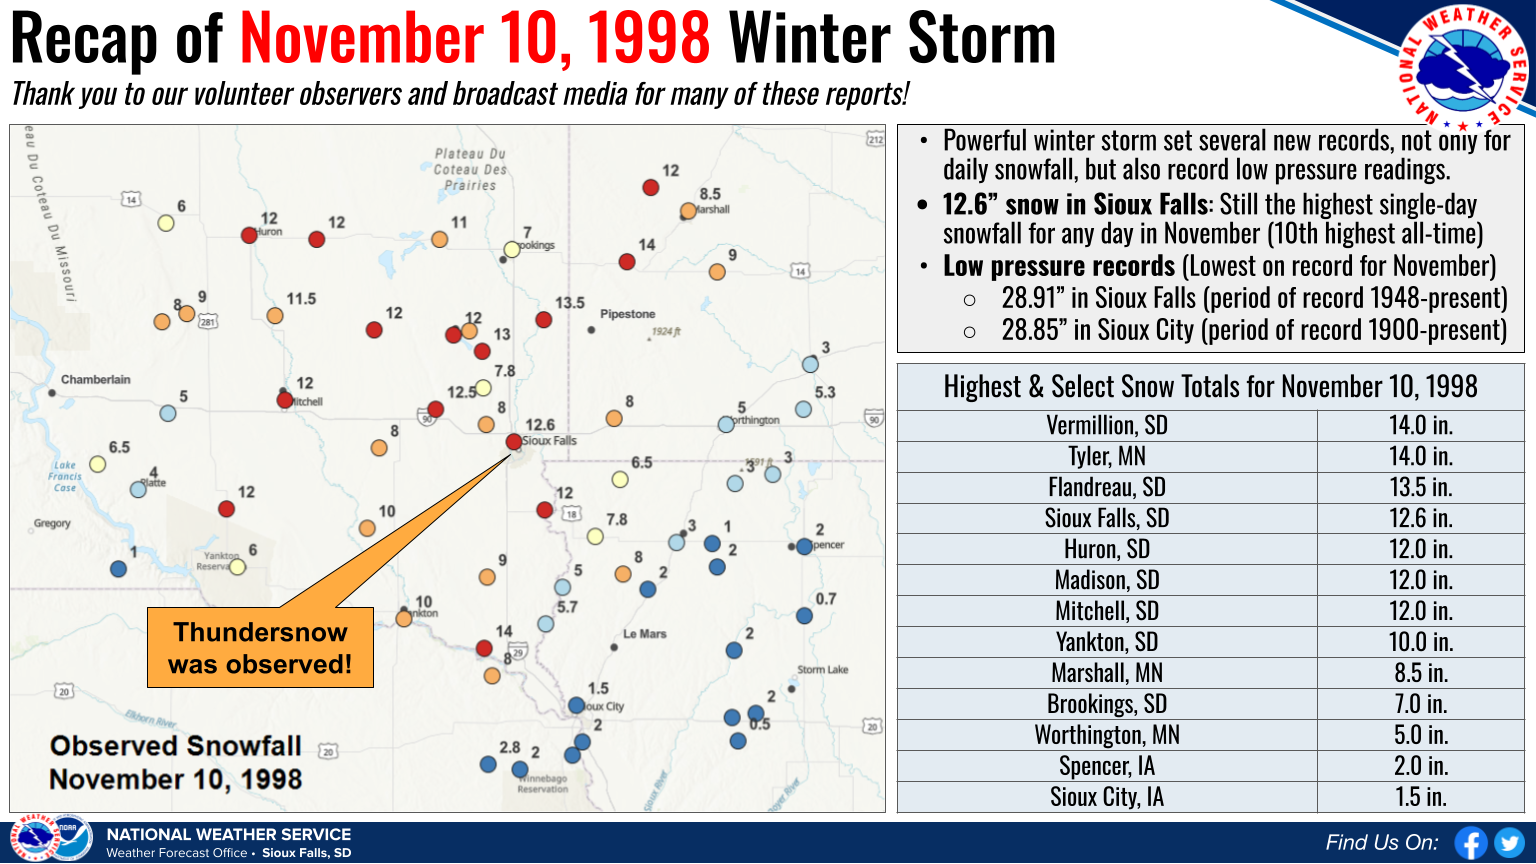 Map and listing of snowfall amounts for November 10, 1998. A broad swath of 8-12 inches blanketed southwest South Dakota and parts of southwest Minnesota, with isolated amounts up to 14 inches (Vermillion, SD and Tyler, MN). A record-setting 12.6 inches was reported in Sioux Falls. Low pressure records for the month of November were also set in Sioux Falls (28.91") and Sioux City (28.85") with this storm.